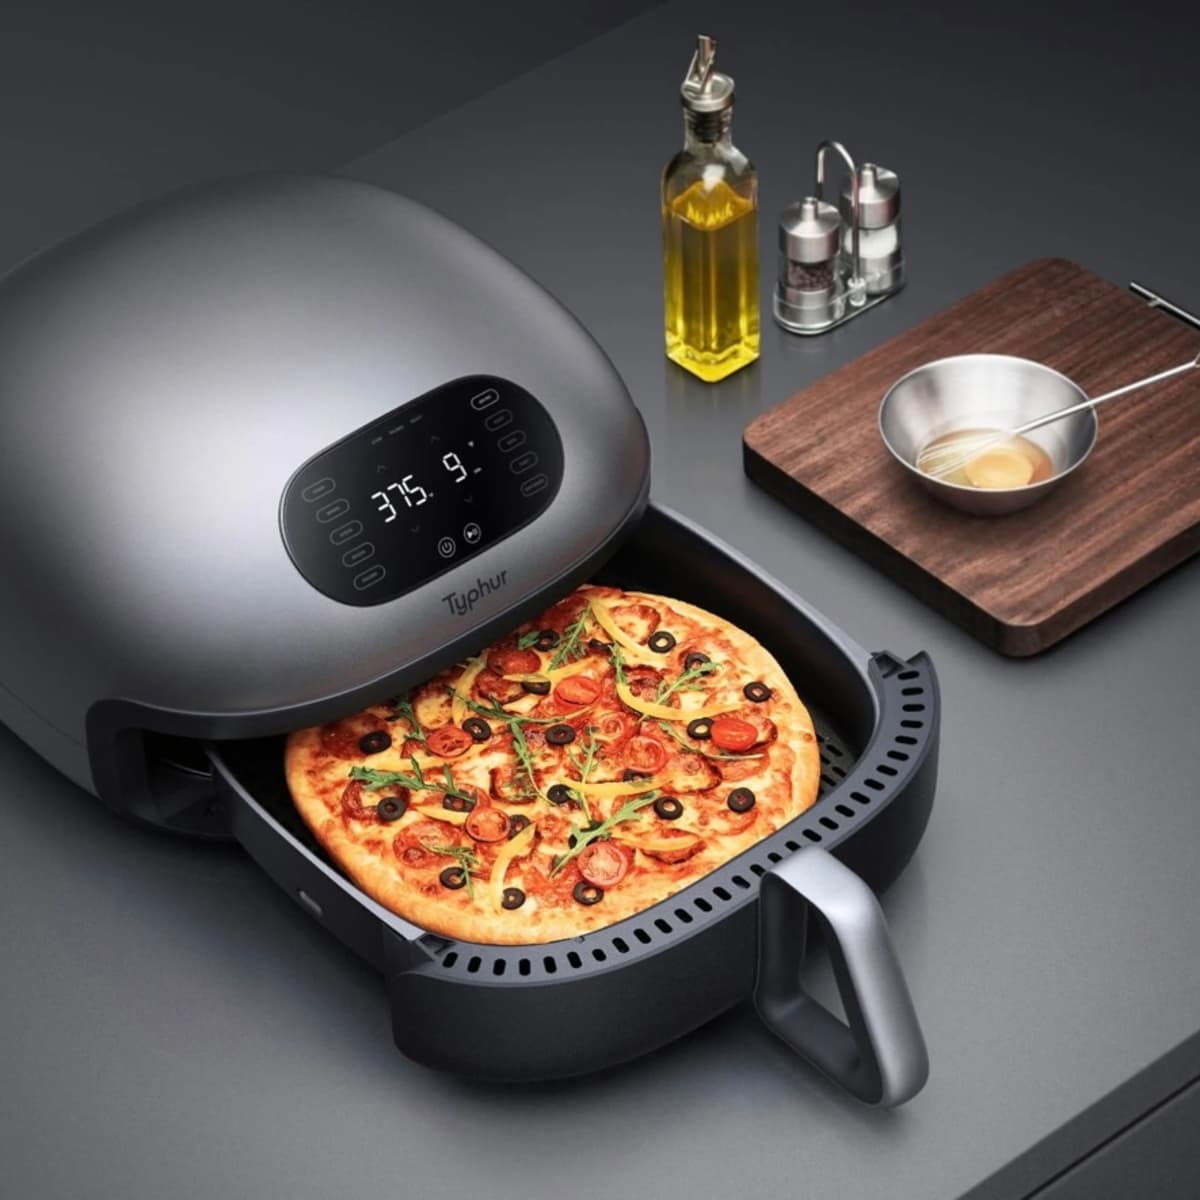 The Typhur Dome Air Fryer Cooks Delicious And Healthy Meals - HubPages